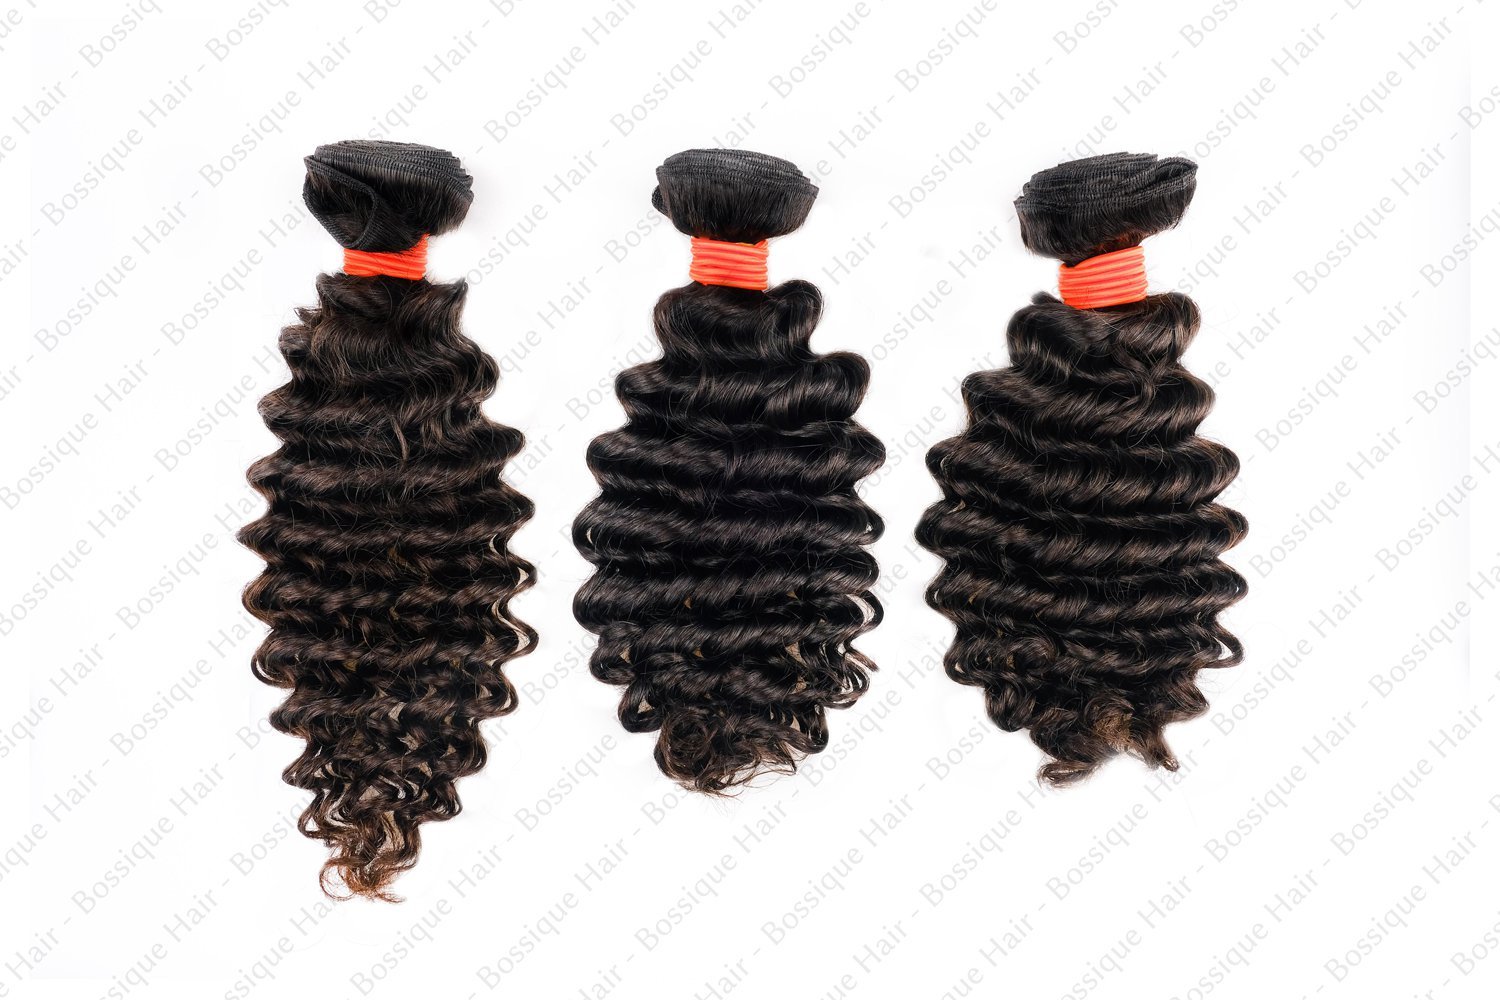 Raw Hair Weft Bundles in Curly Texture